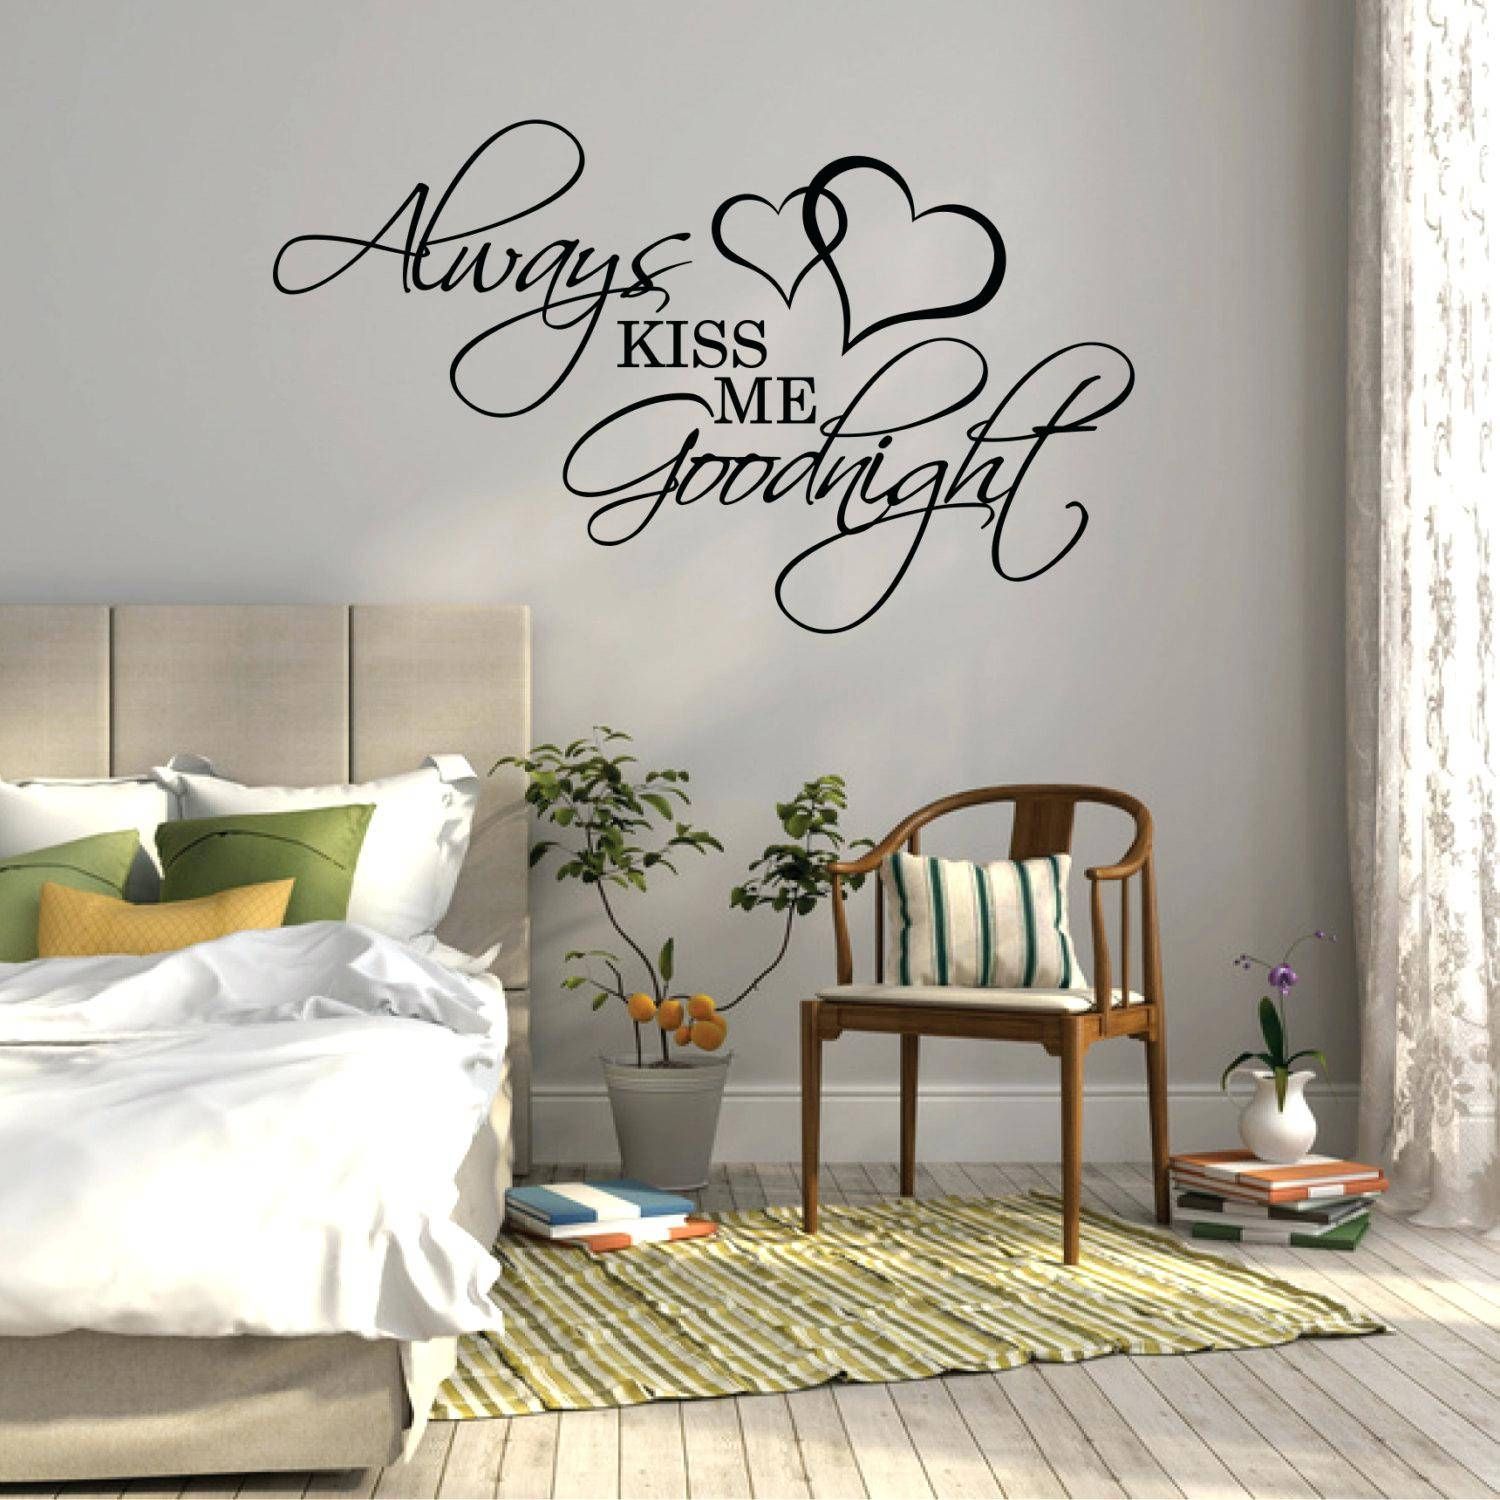 Wall Ideas : Zoom Love Wall Art Decor Love Decors Wall Stickers For Most Up To Date Kohls Wall Decals (Gallery 6 of 25)